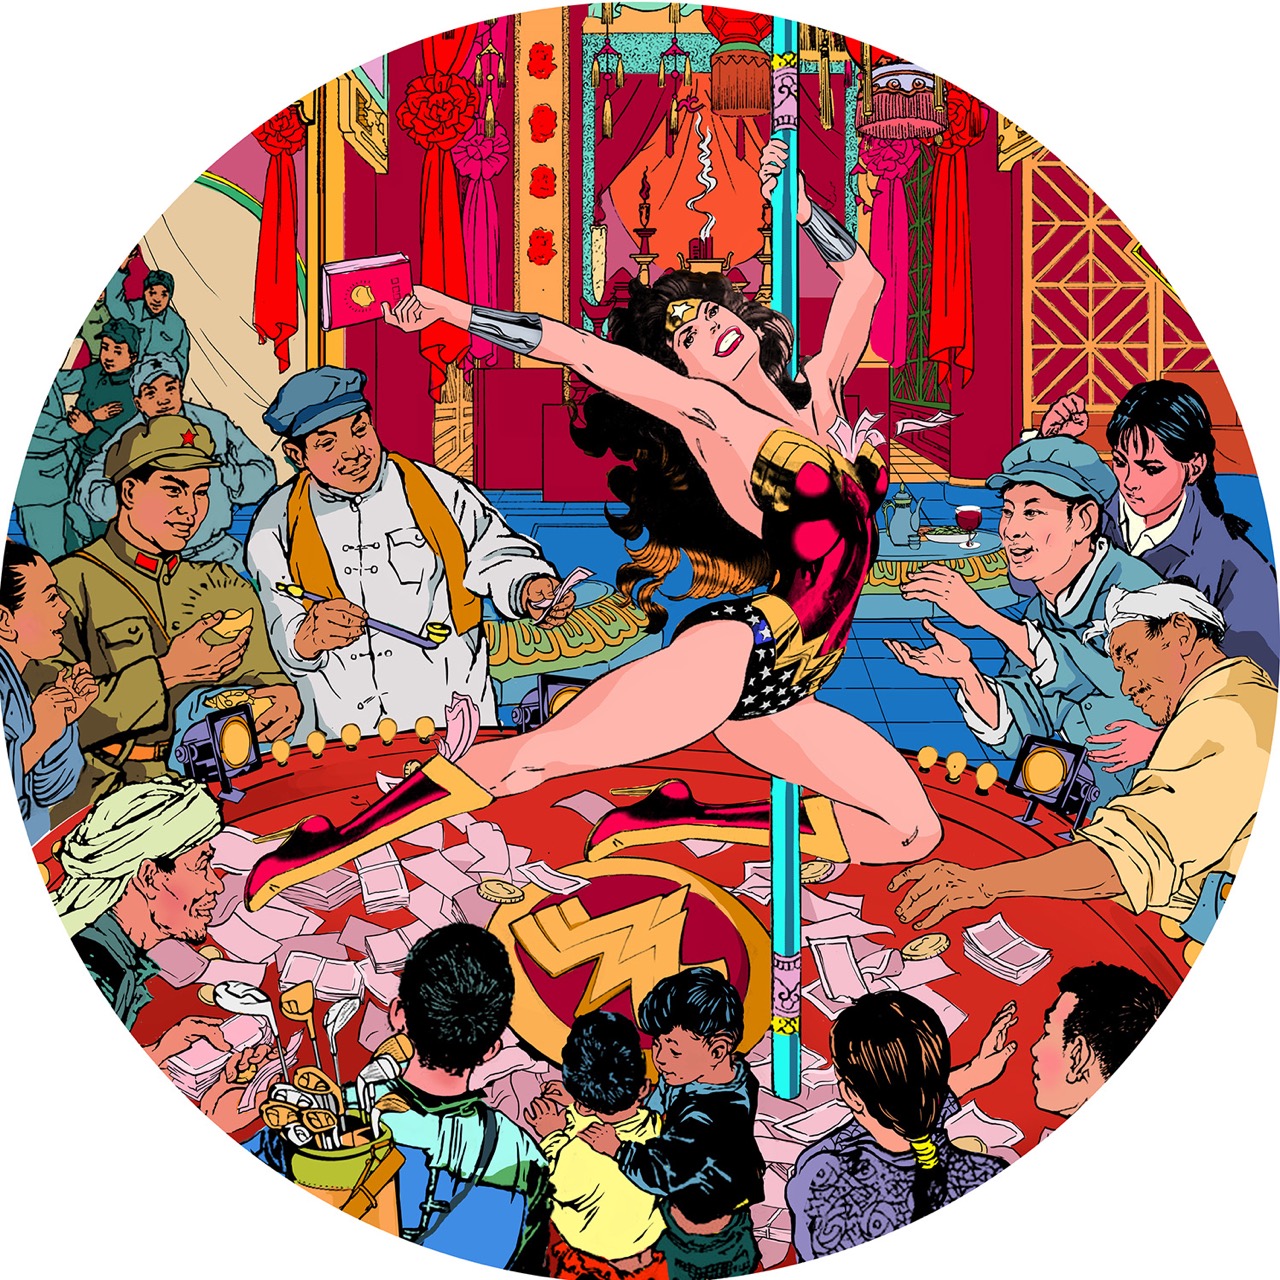 Jacky Tsai ‘The Pole Dancer’ (acrylic and gold leaf on linen; 51 inches diameter)